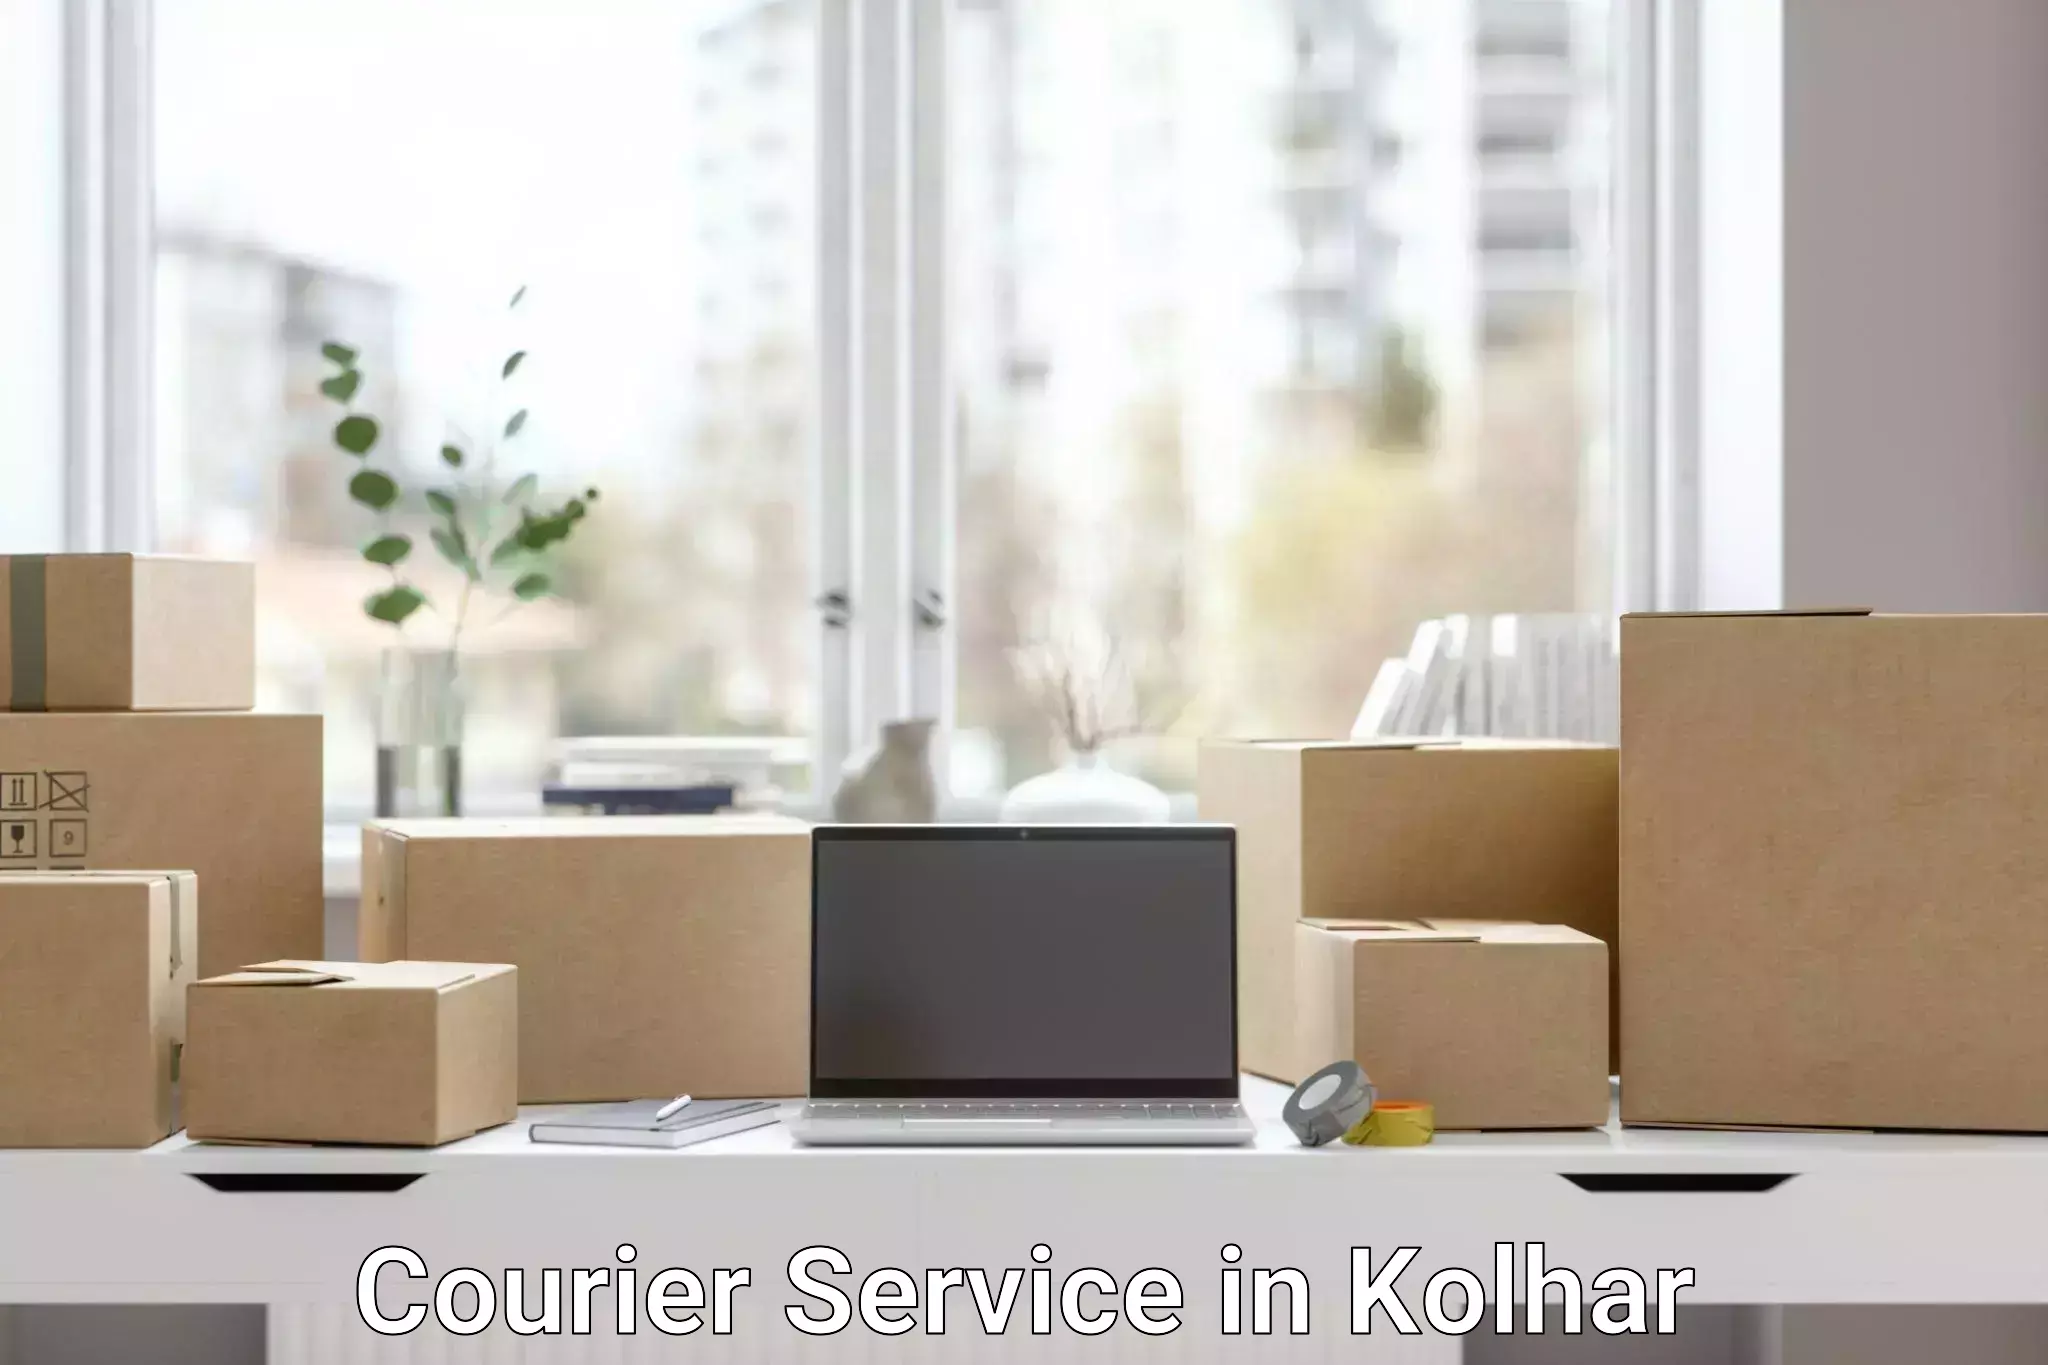 Efficient package consolidation in Kolhar